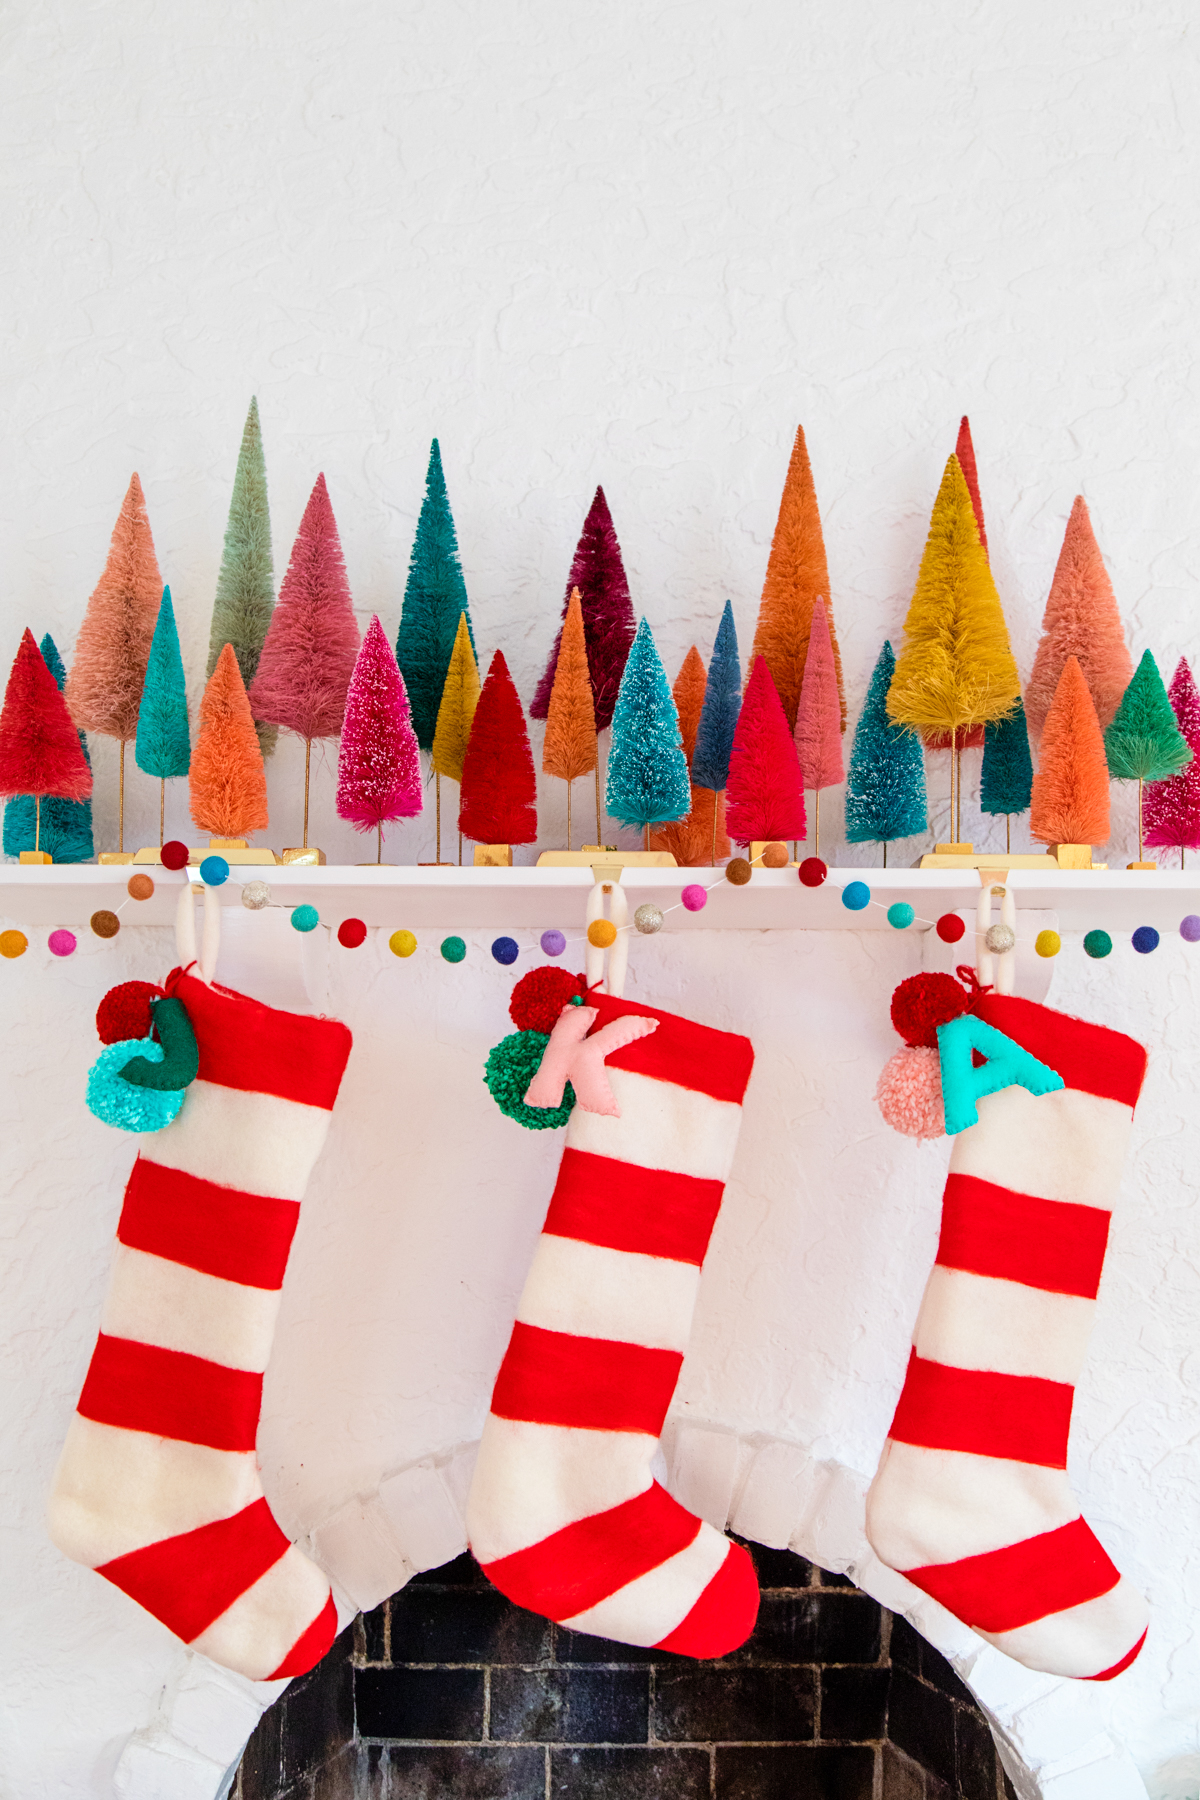 10 DIY Stocking Stuffer Ideas for the Whole Family